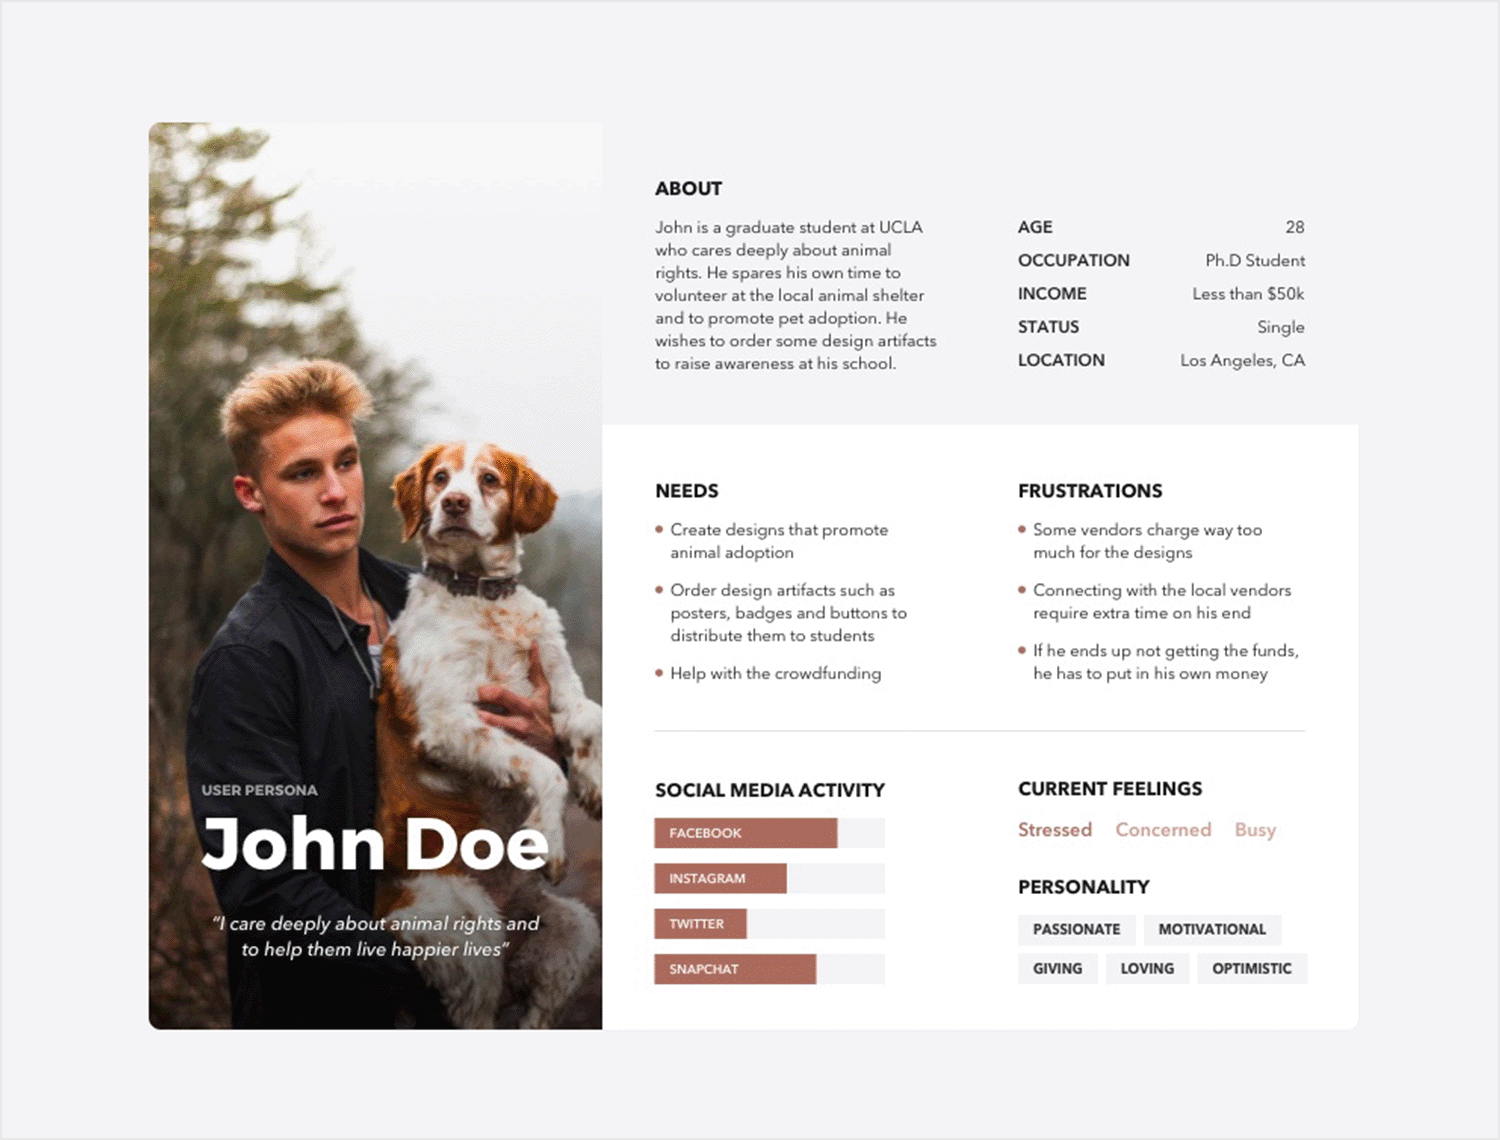 User persona template for John Doe, an animal rights activist, detailing motivations, challenges, and potential business assistance.